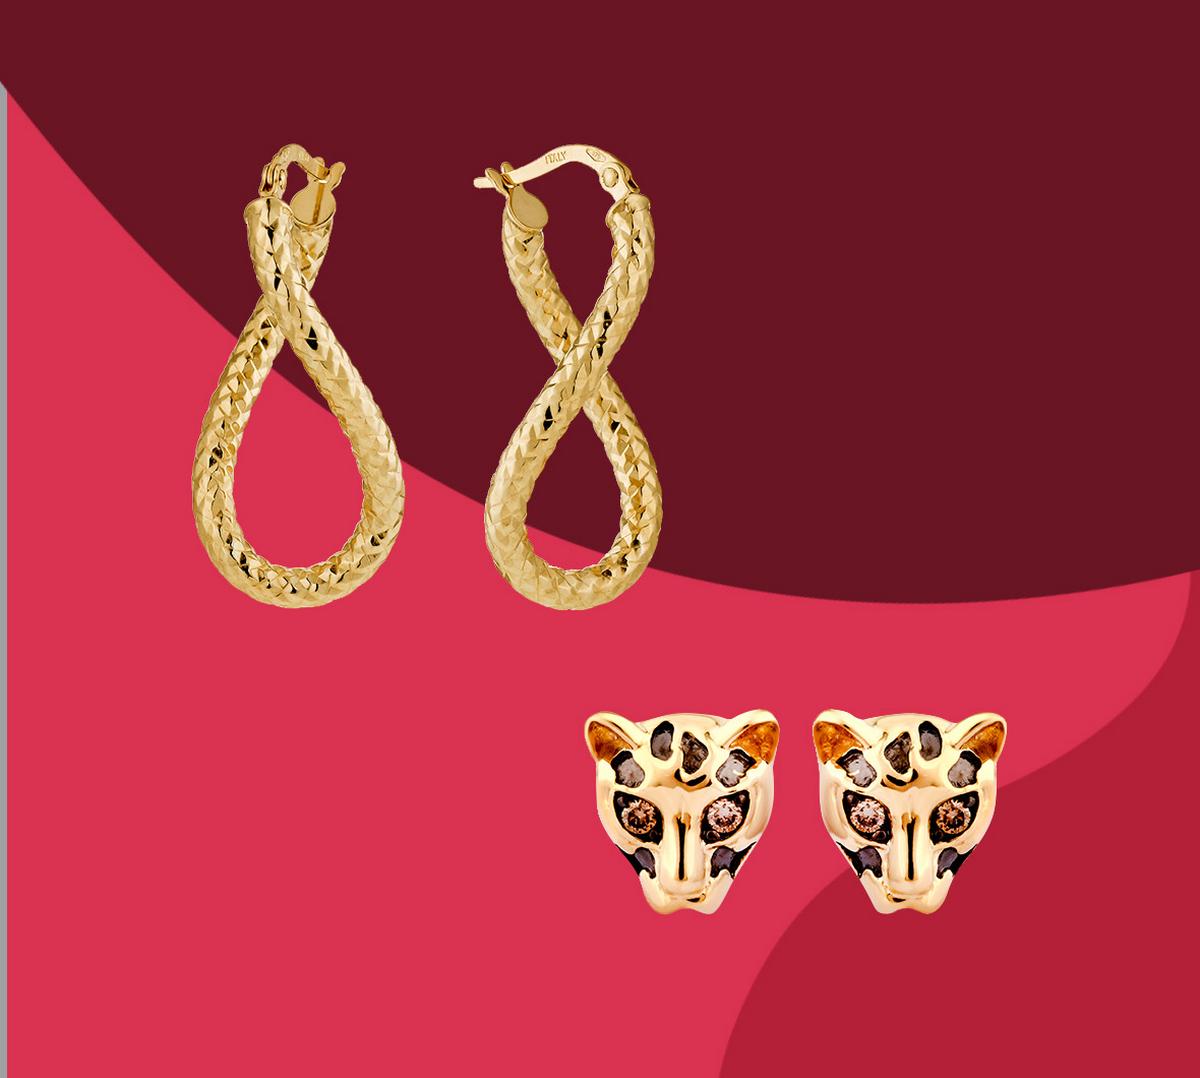 gold twist hoop earrings and gold panther earrings